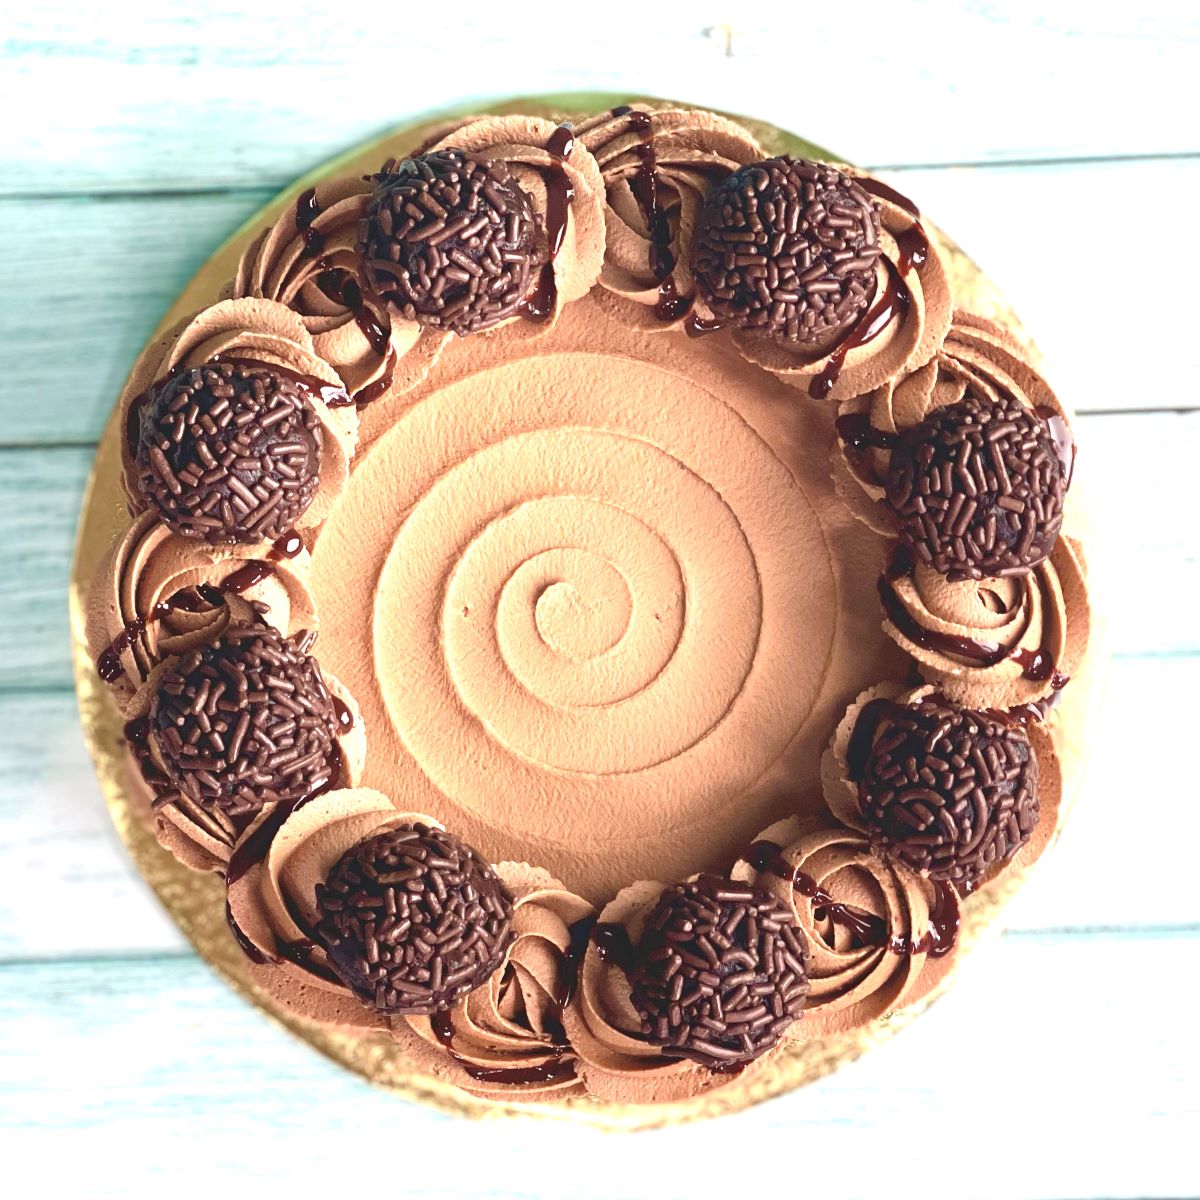 An overhead shot of a chocolate cake decorated with chocolate cake truffles.